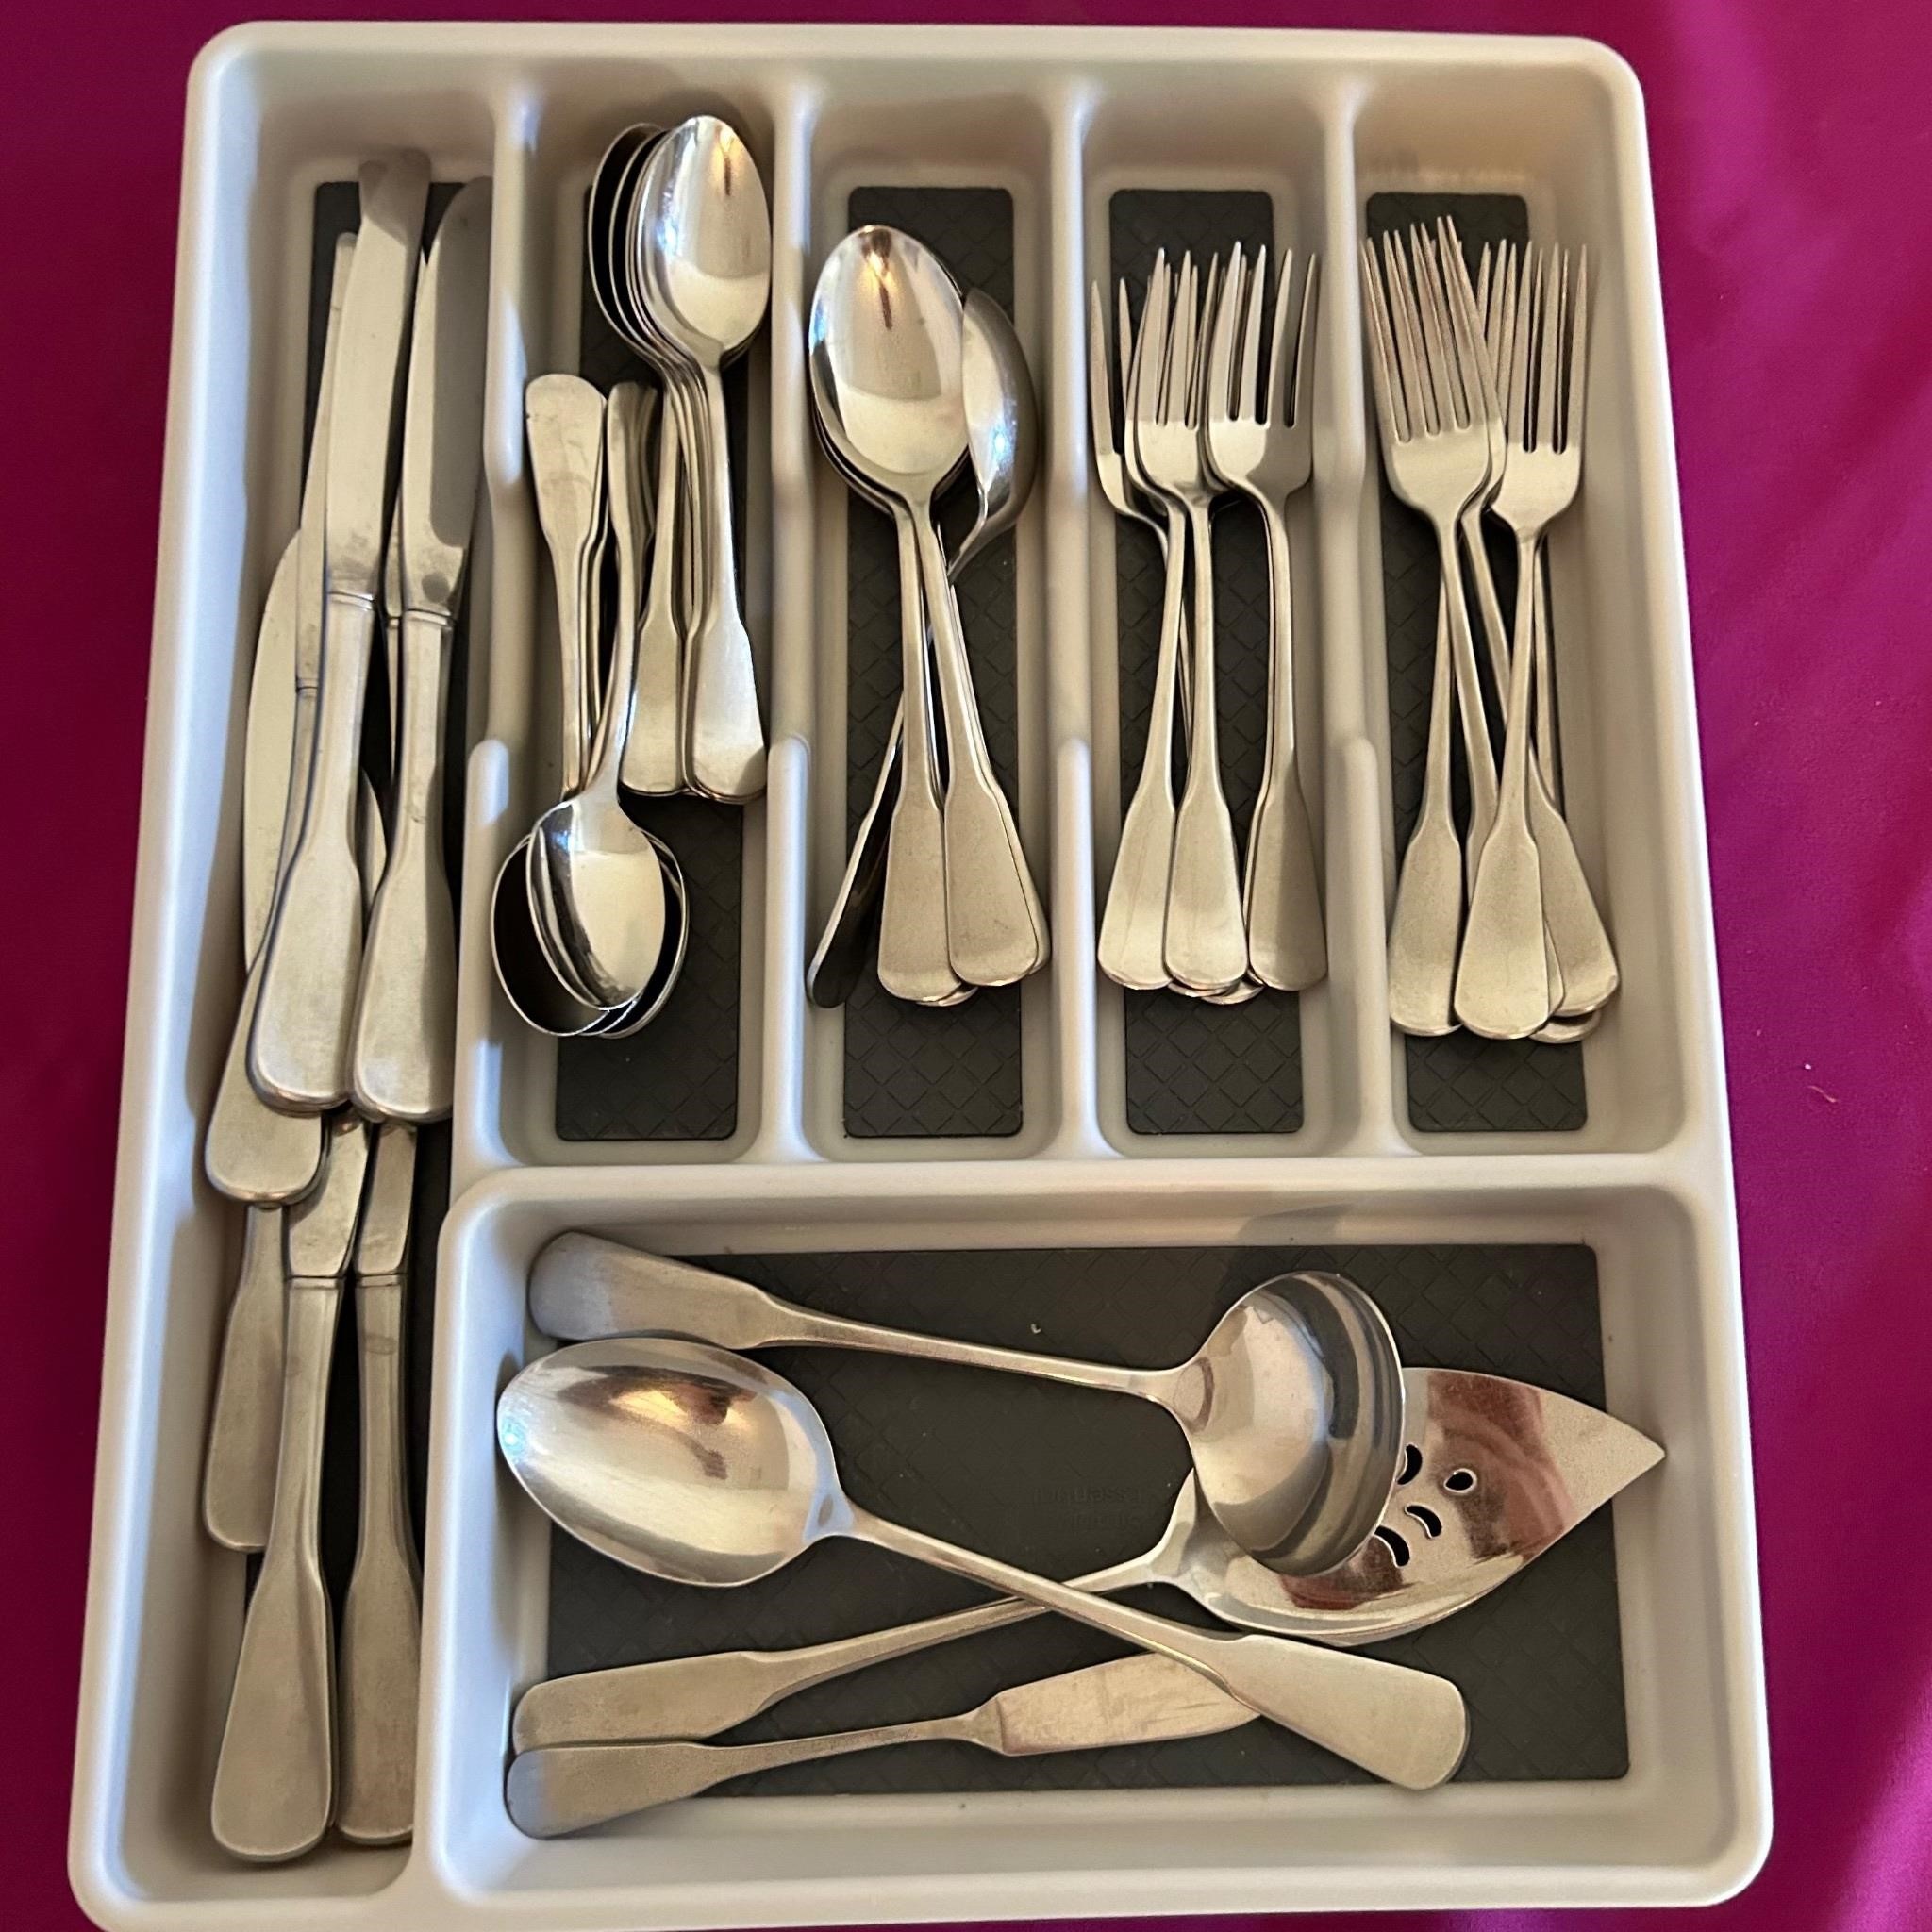 Tradition Stainless USA Flatware + Tray